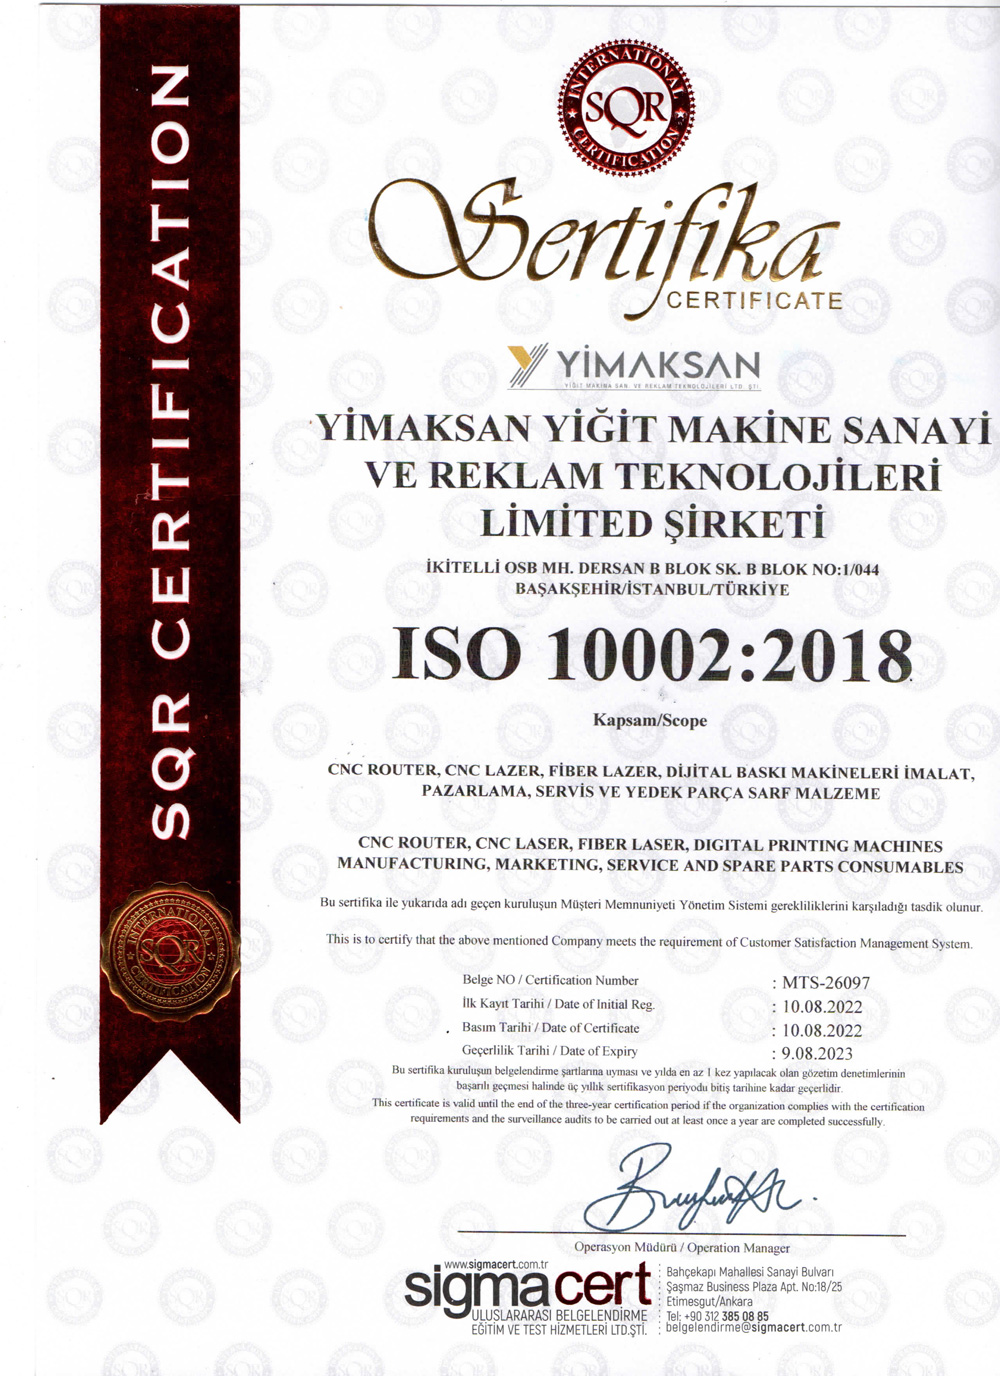 ISO-10002-2018